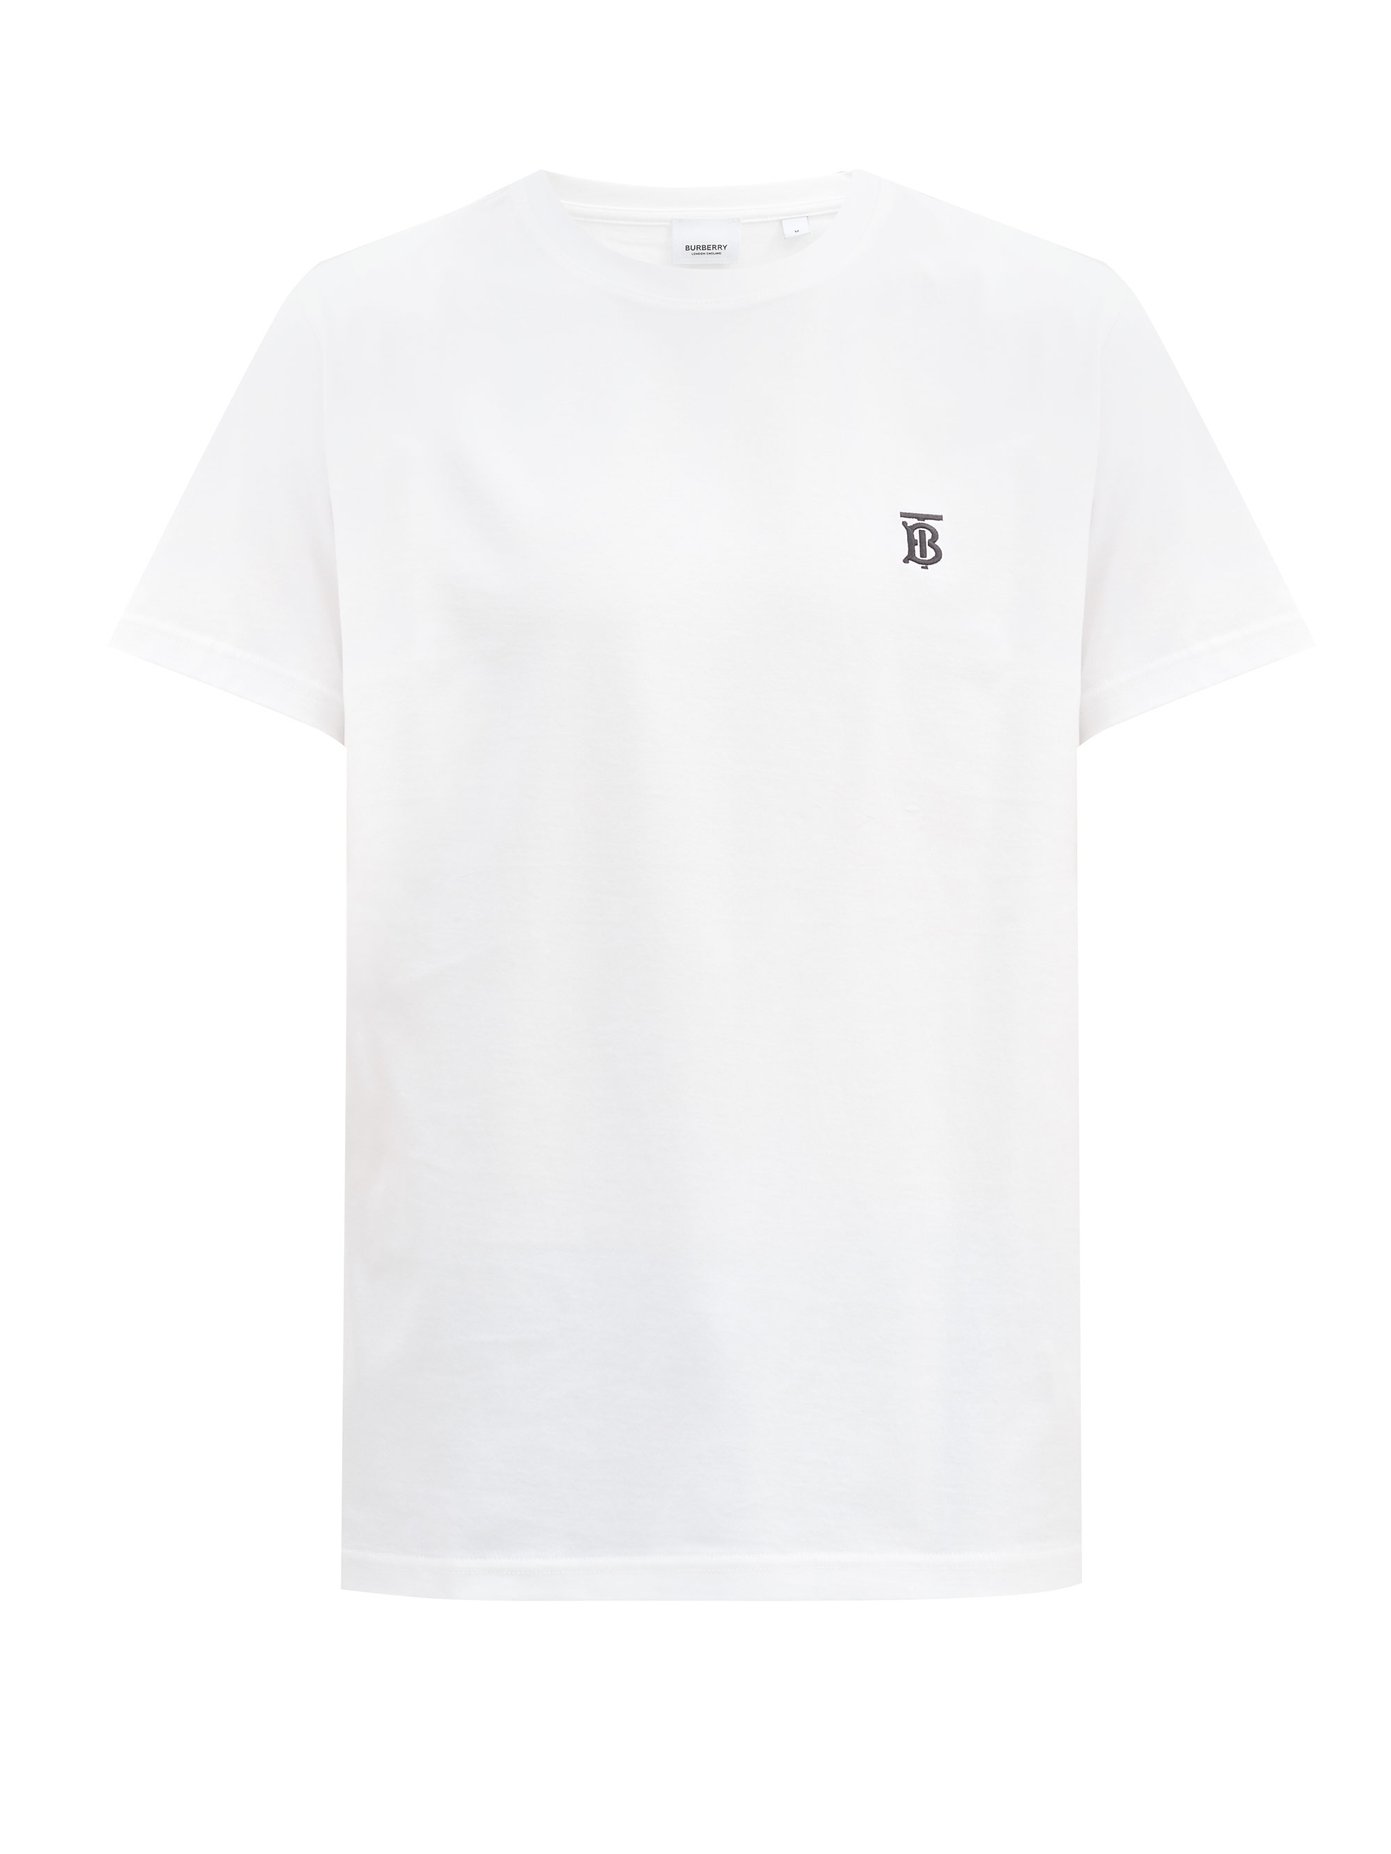 burberry embroidered logo t shirt